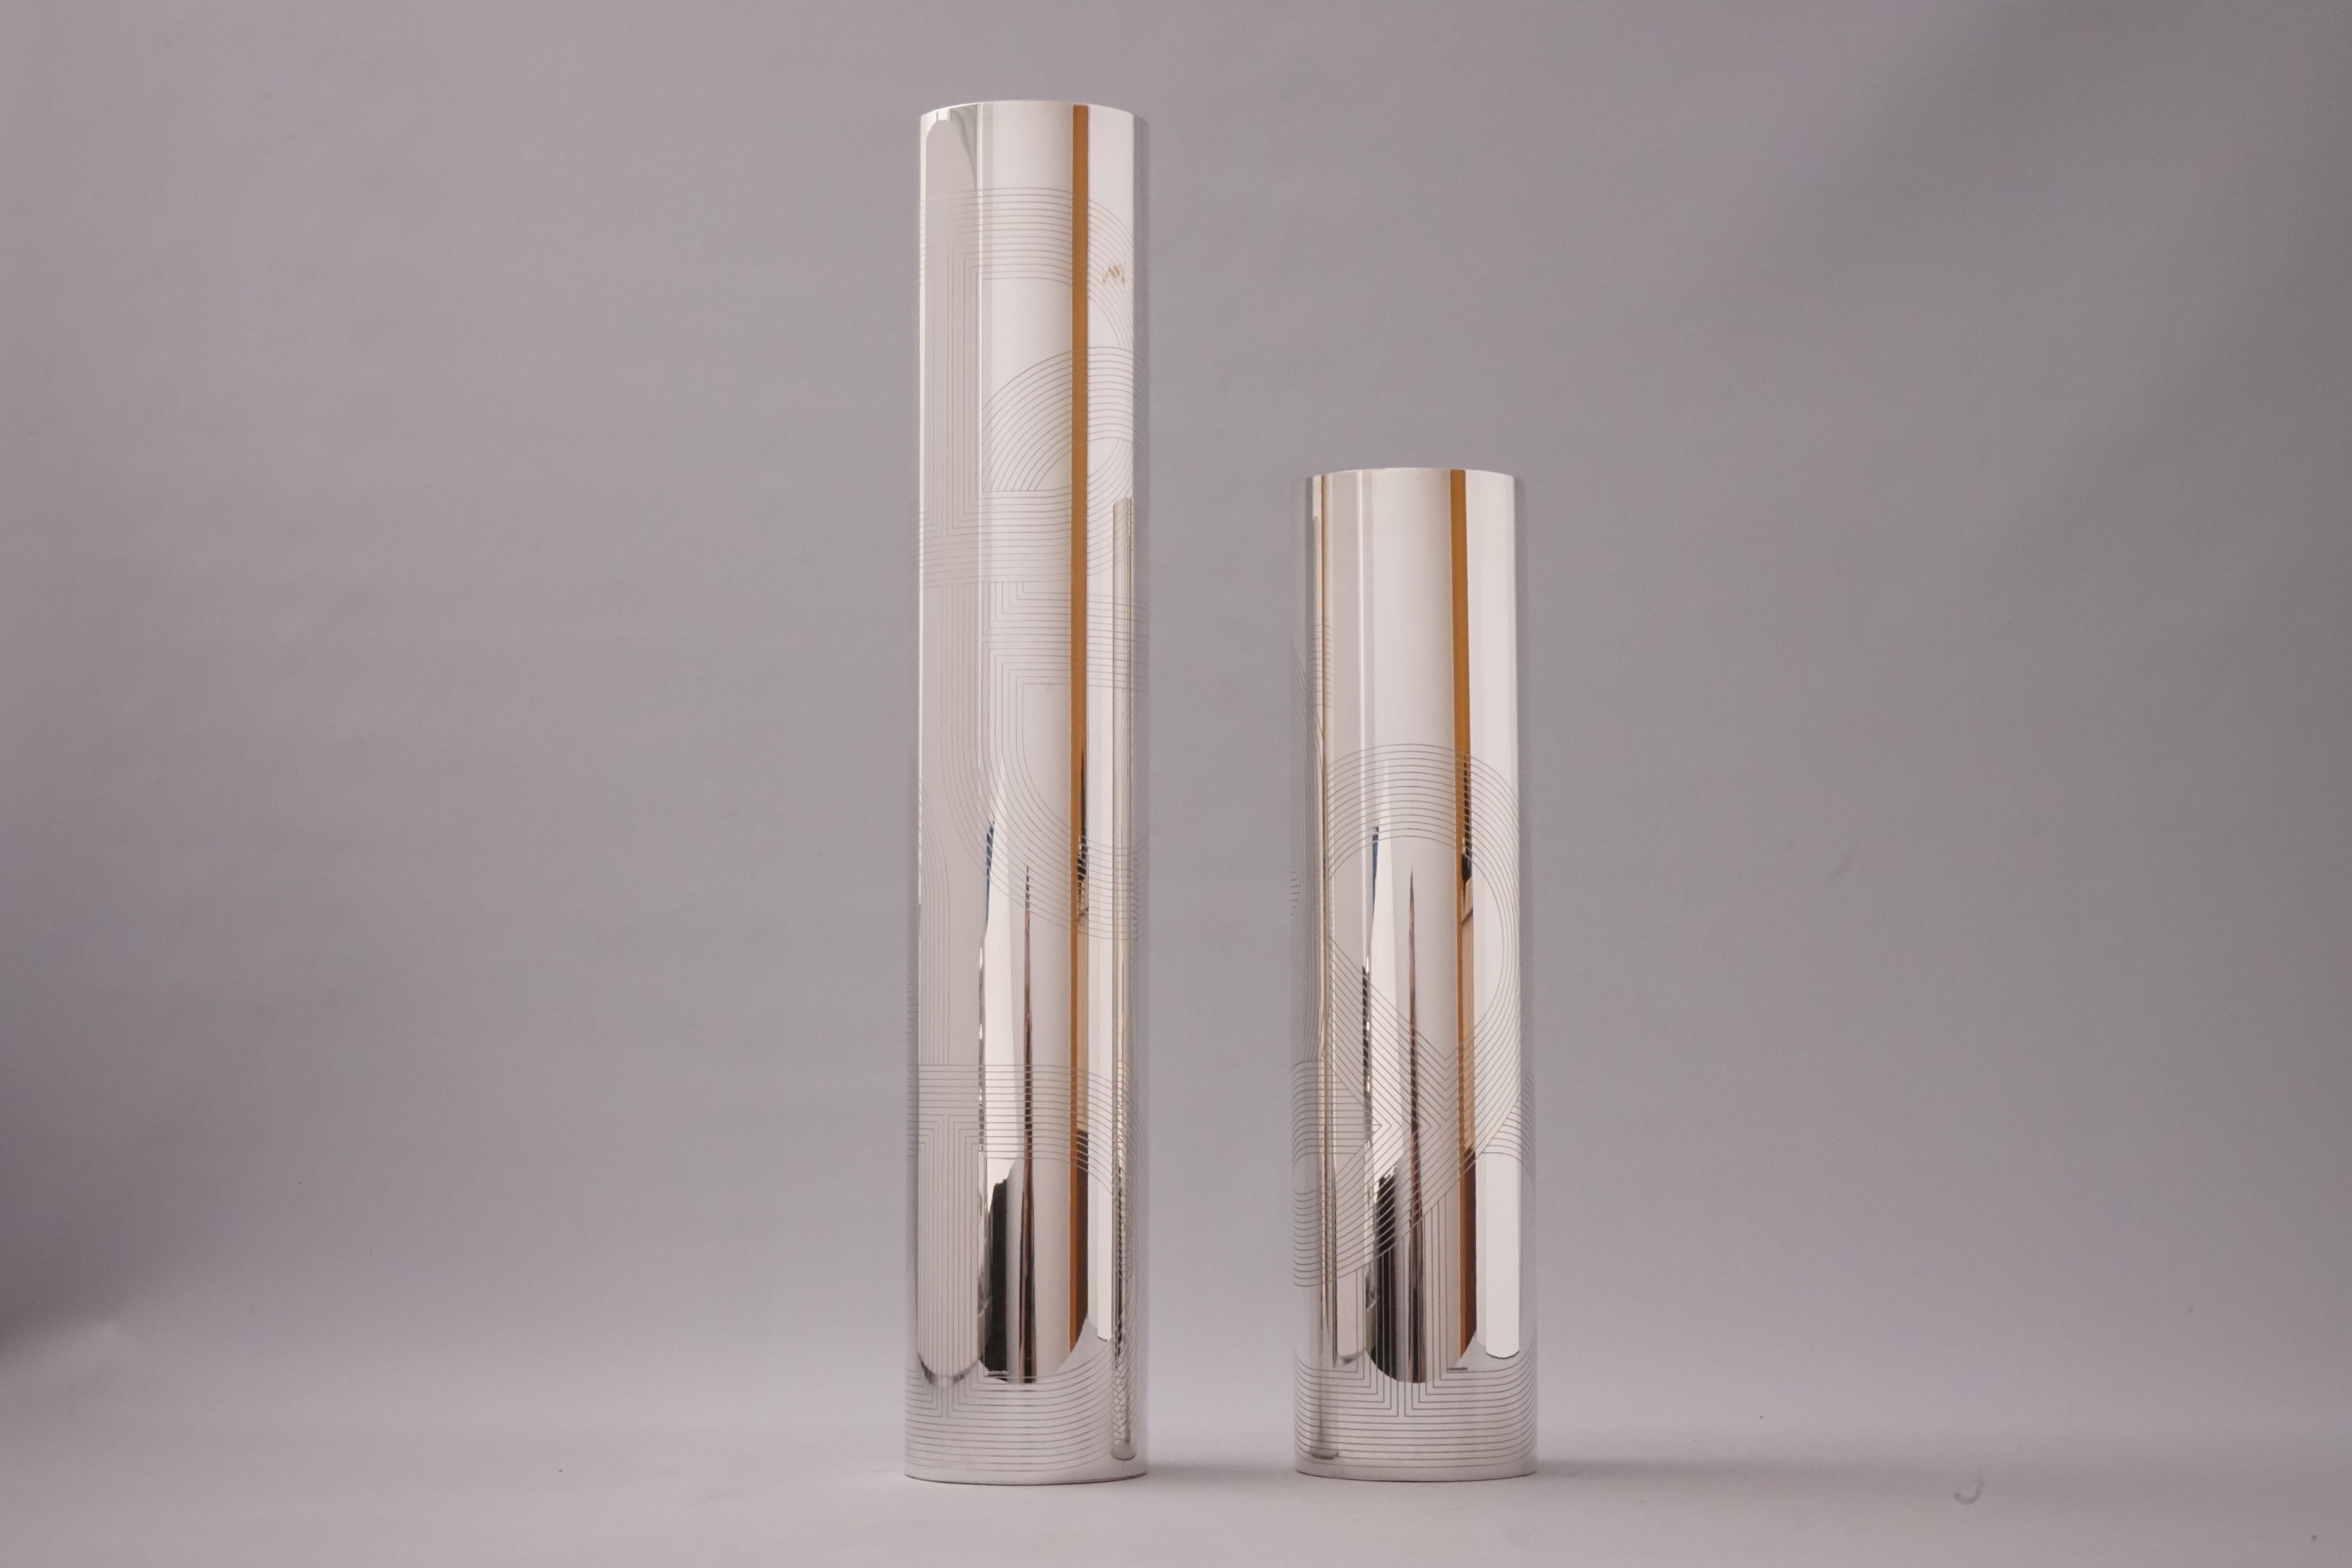 Chaîne d'Ancre Vase by Hermès Paris, set of 2. 

Pair of imposing silver-plated vases from the Mainson of Hermès Paris, decorated with the classic decor 